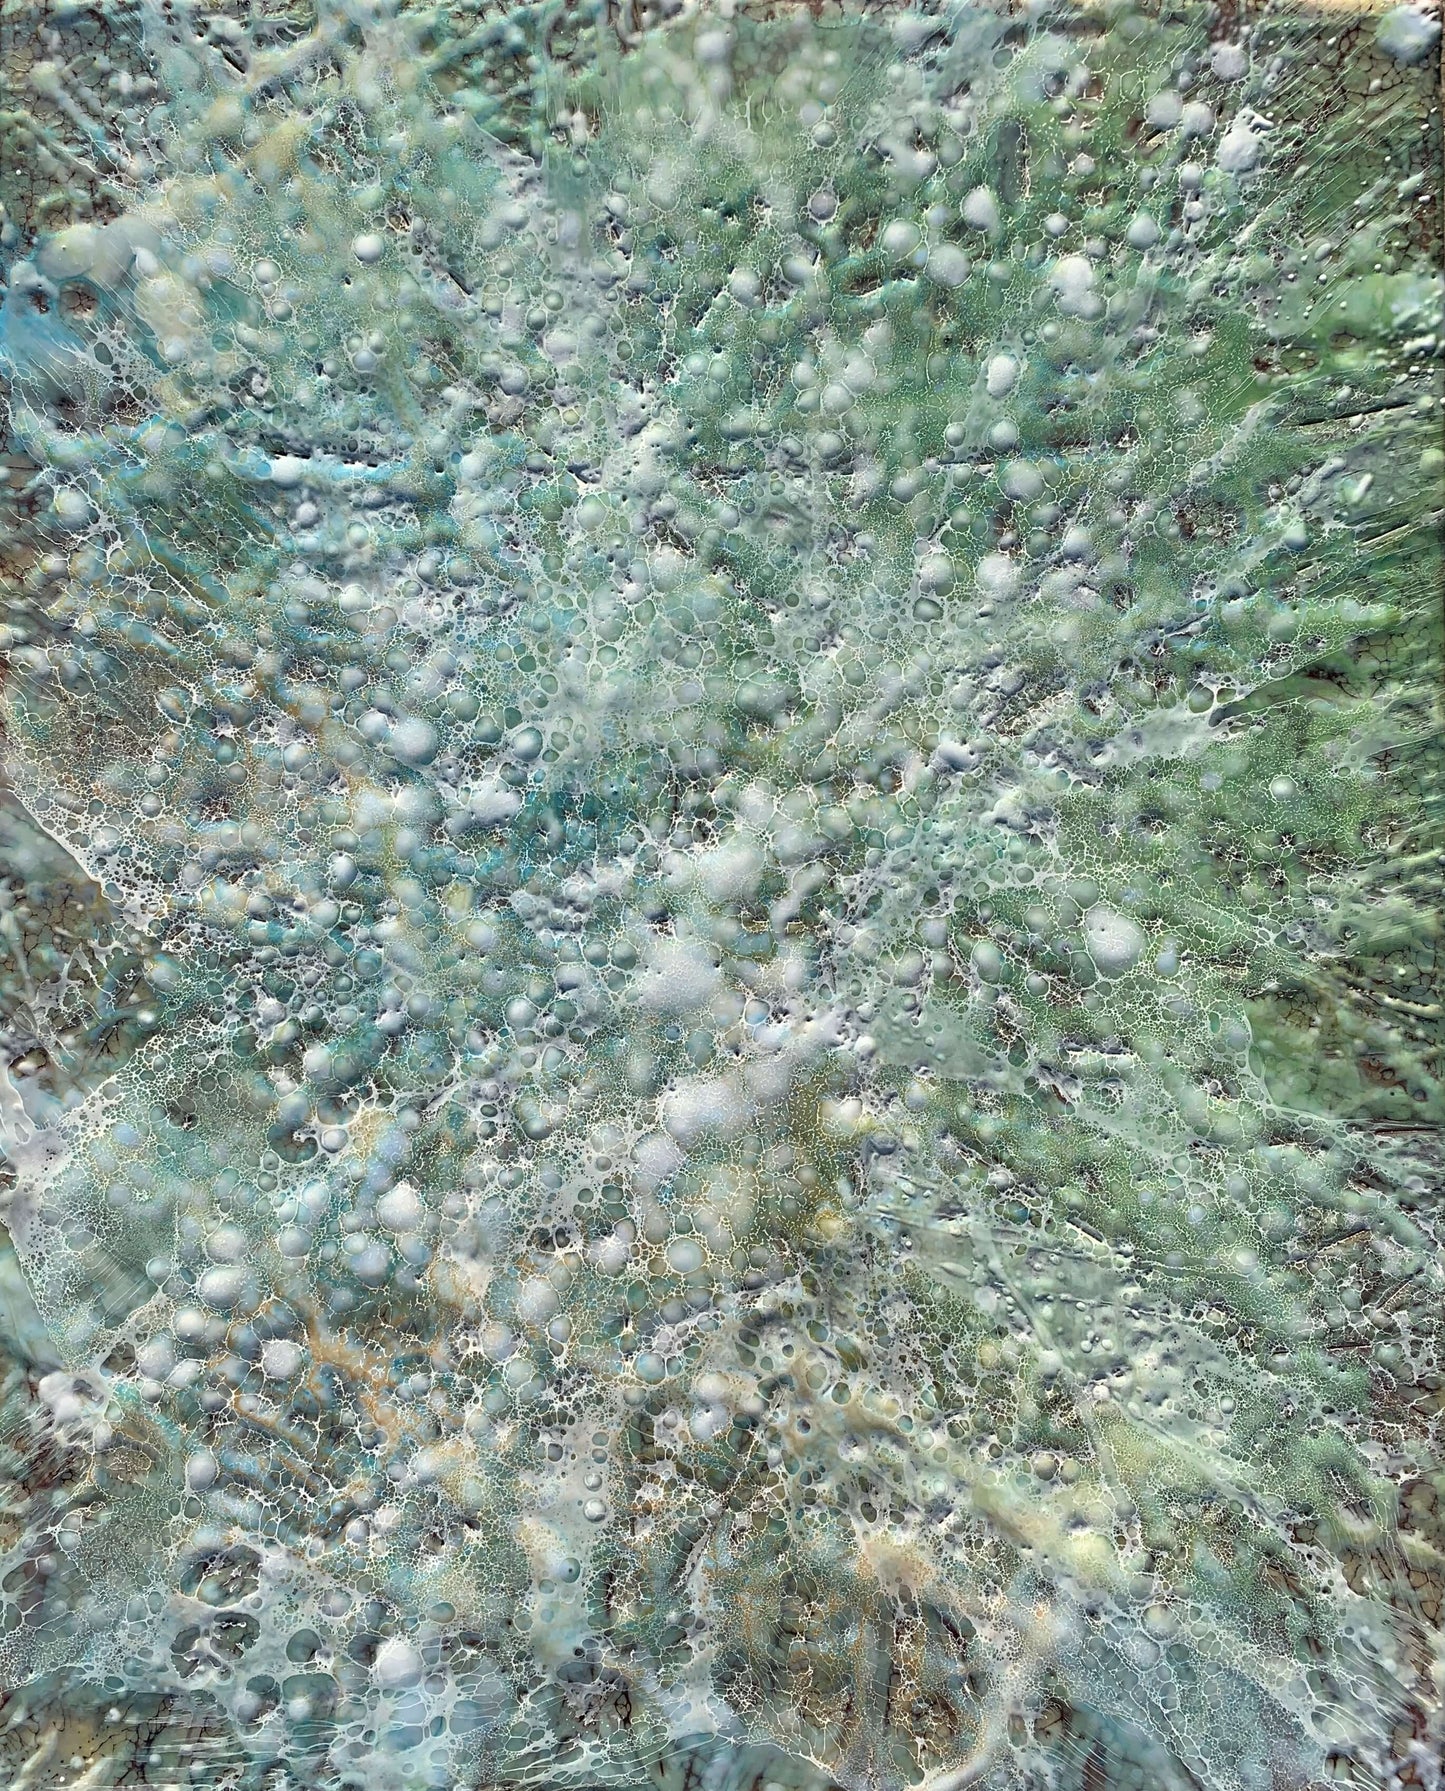 Abstract Encaustic Painting, 16x20in.  Inspired and named after a song by Astrud Gilberto, Gentle Rain. Created with beeswax, damar resin, dry pigments and shellac on cradled wood panel. This painting is bursting with blues, greens and variations of earthy pigments. The delicate lace like texture of shellac mimics rain drops hitting the ground and creating tiny bubbles on the surface.    Hanging hardware is included 